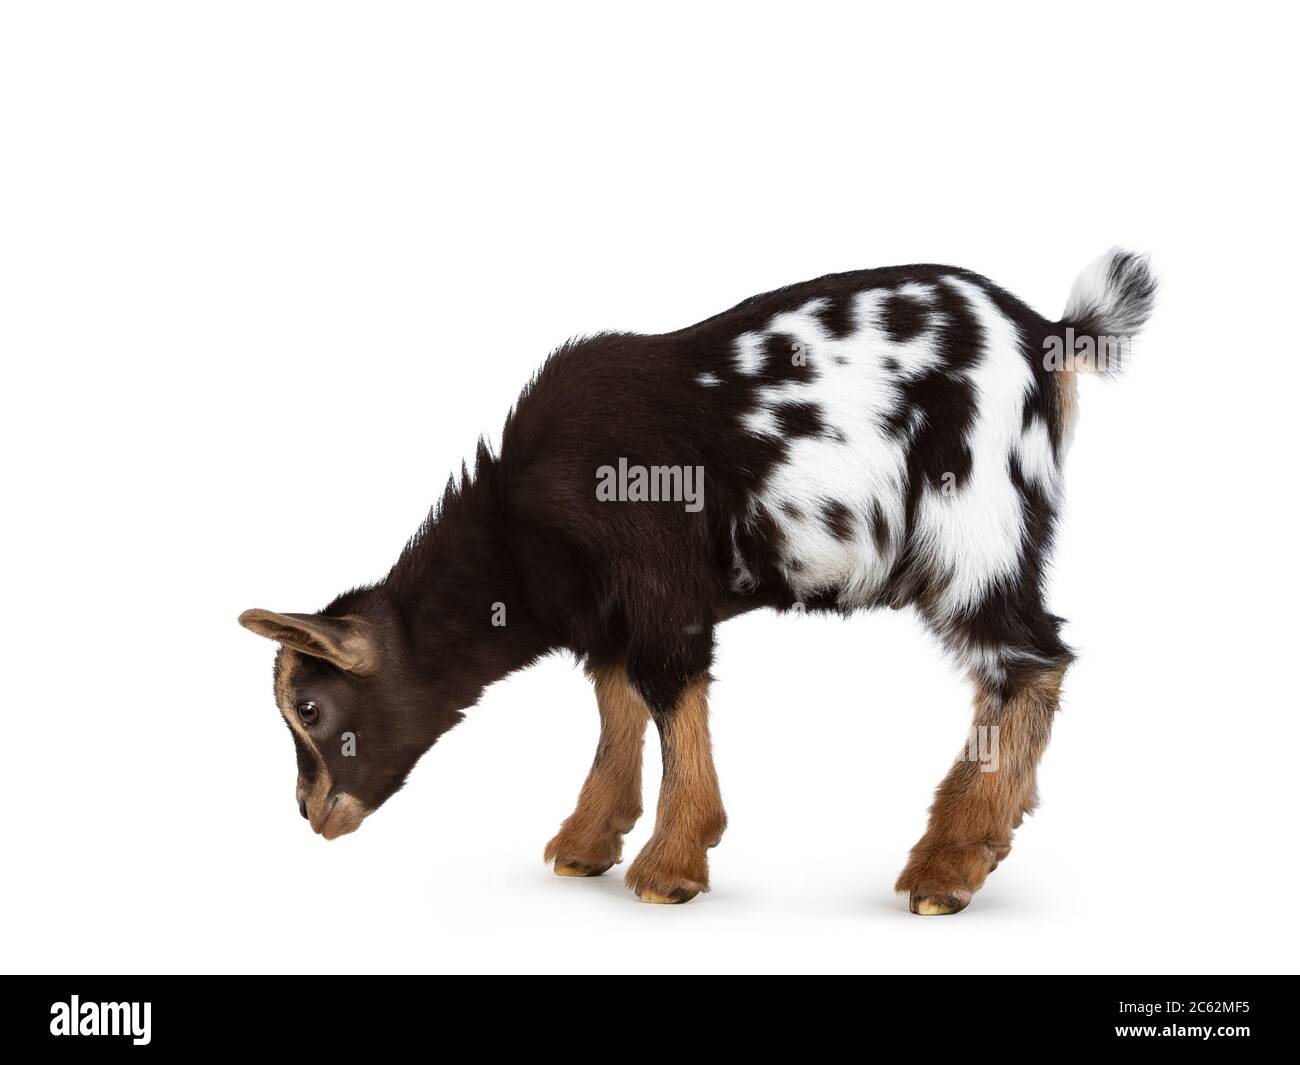 Cute brown with white spotted belly baby pygmy goat, standing side ways. Head down and looking straight ahead to the ground. Isolated on a white backg Stock Photo